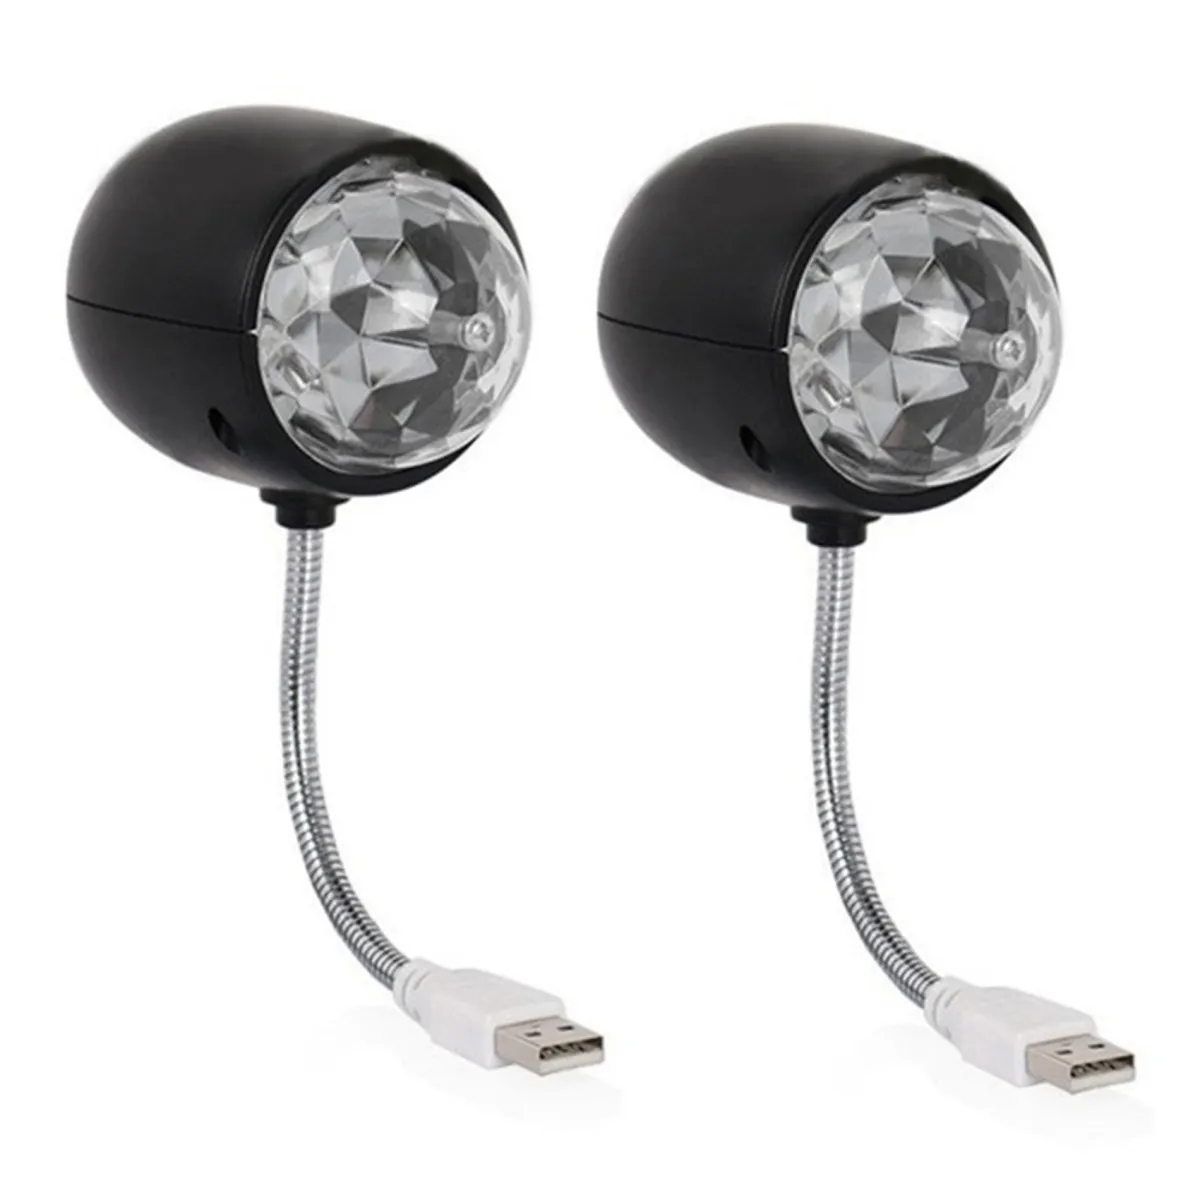 ✥ 2X USB Disco Ball Lamp Rotating RGB Colored LED Stage Lighting Party Bulb  with 3W Book Light USB Powered (Black) 